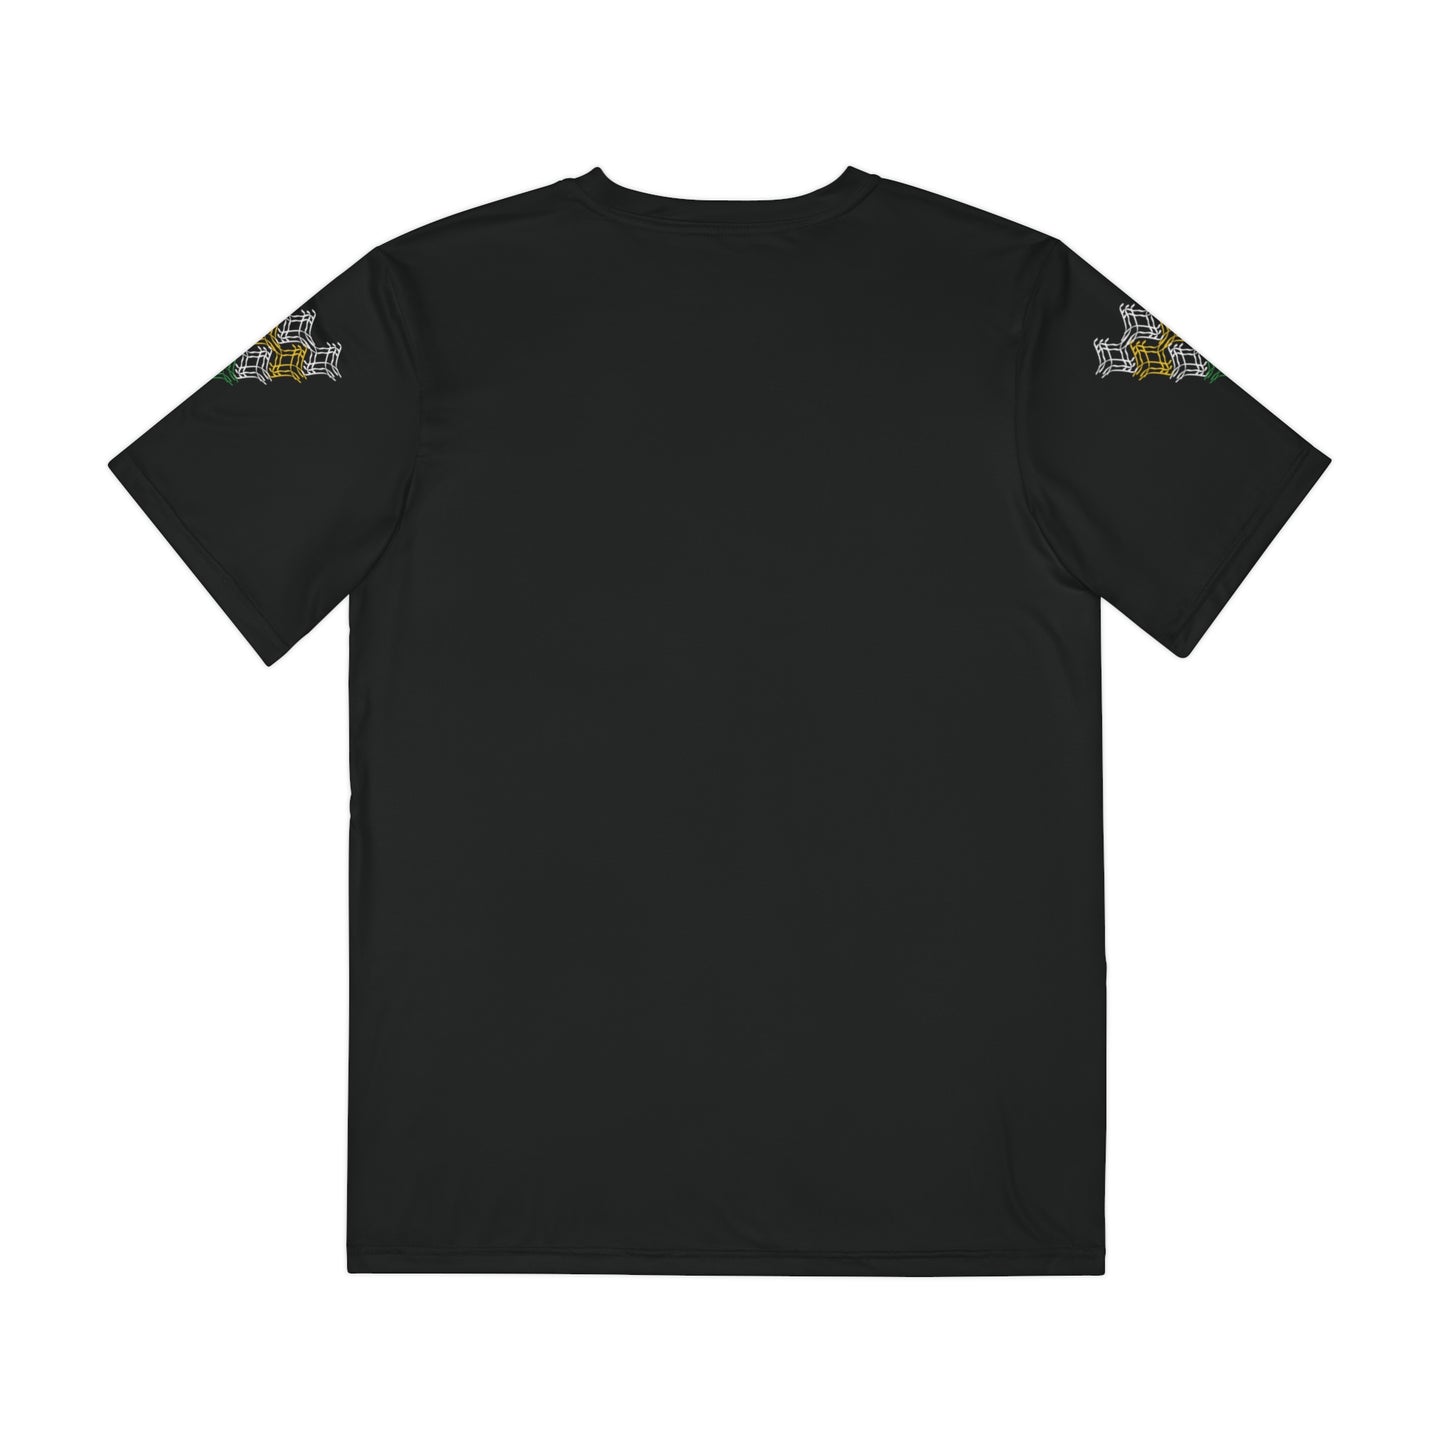 Men's Polyester Graphic T-shirt - Black with JA Colors